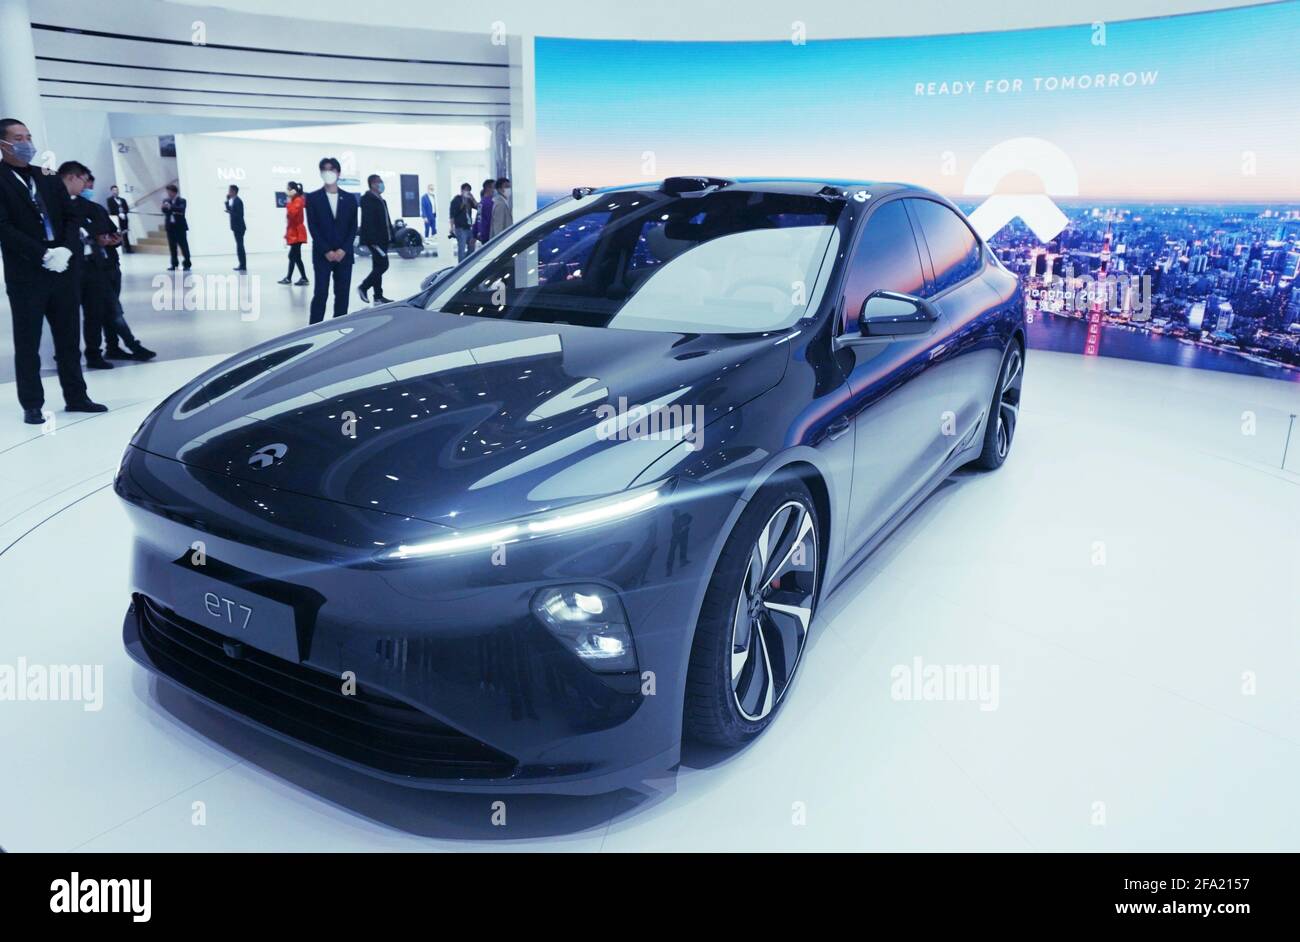 Shanghai, Shanghai, China. 20th Apr, 2021. On April 20, 2021, the new car NIO ET7 released by NIO at the Shanghai Auto Show attracted many fans to watch. At the 2021 Shanghai Auto Show, NIO, as one of the new car-making forces in China, released its first L4 autonomous driving smart flagship sedan ''NIO ET7'', which has attracted the attention of many car fans.NIO ET7 applies NIO NAD autopilot technology, is equipped with NIO Aquila super-sensing system, and is equipped with a total of 33 sensing hardware including 11 high-definition cameras and high-precision lidar, and cooperates with NIO Stock Photo